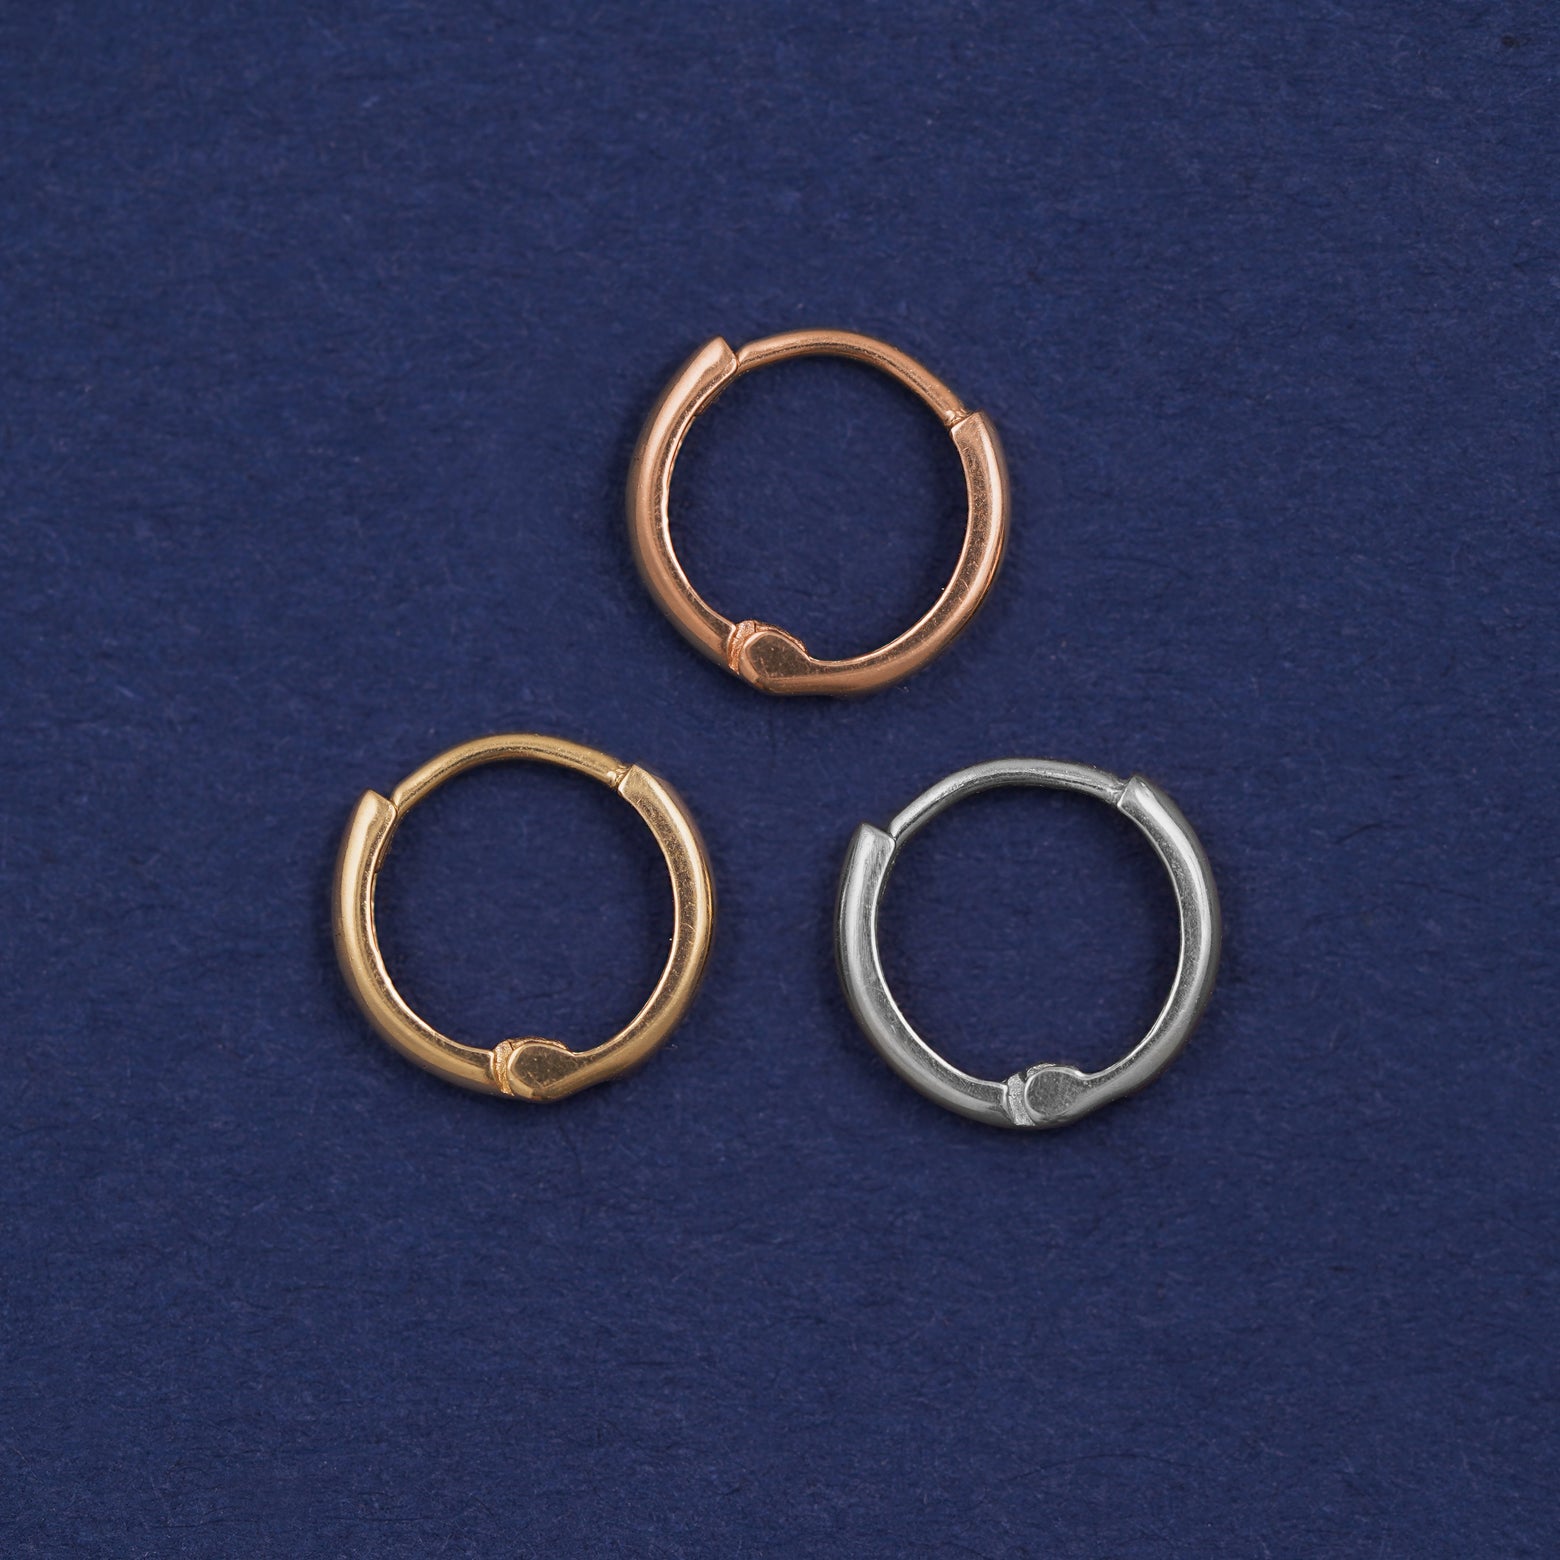 Three versions of the Mini Curvy Huggie Hoop shown in options of rose, yellow, and white gold